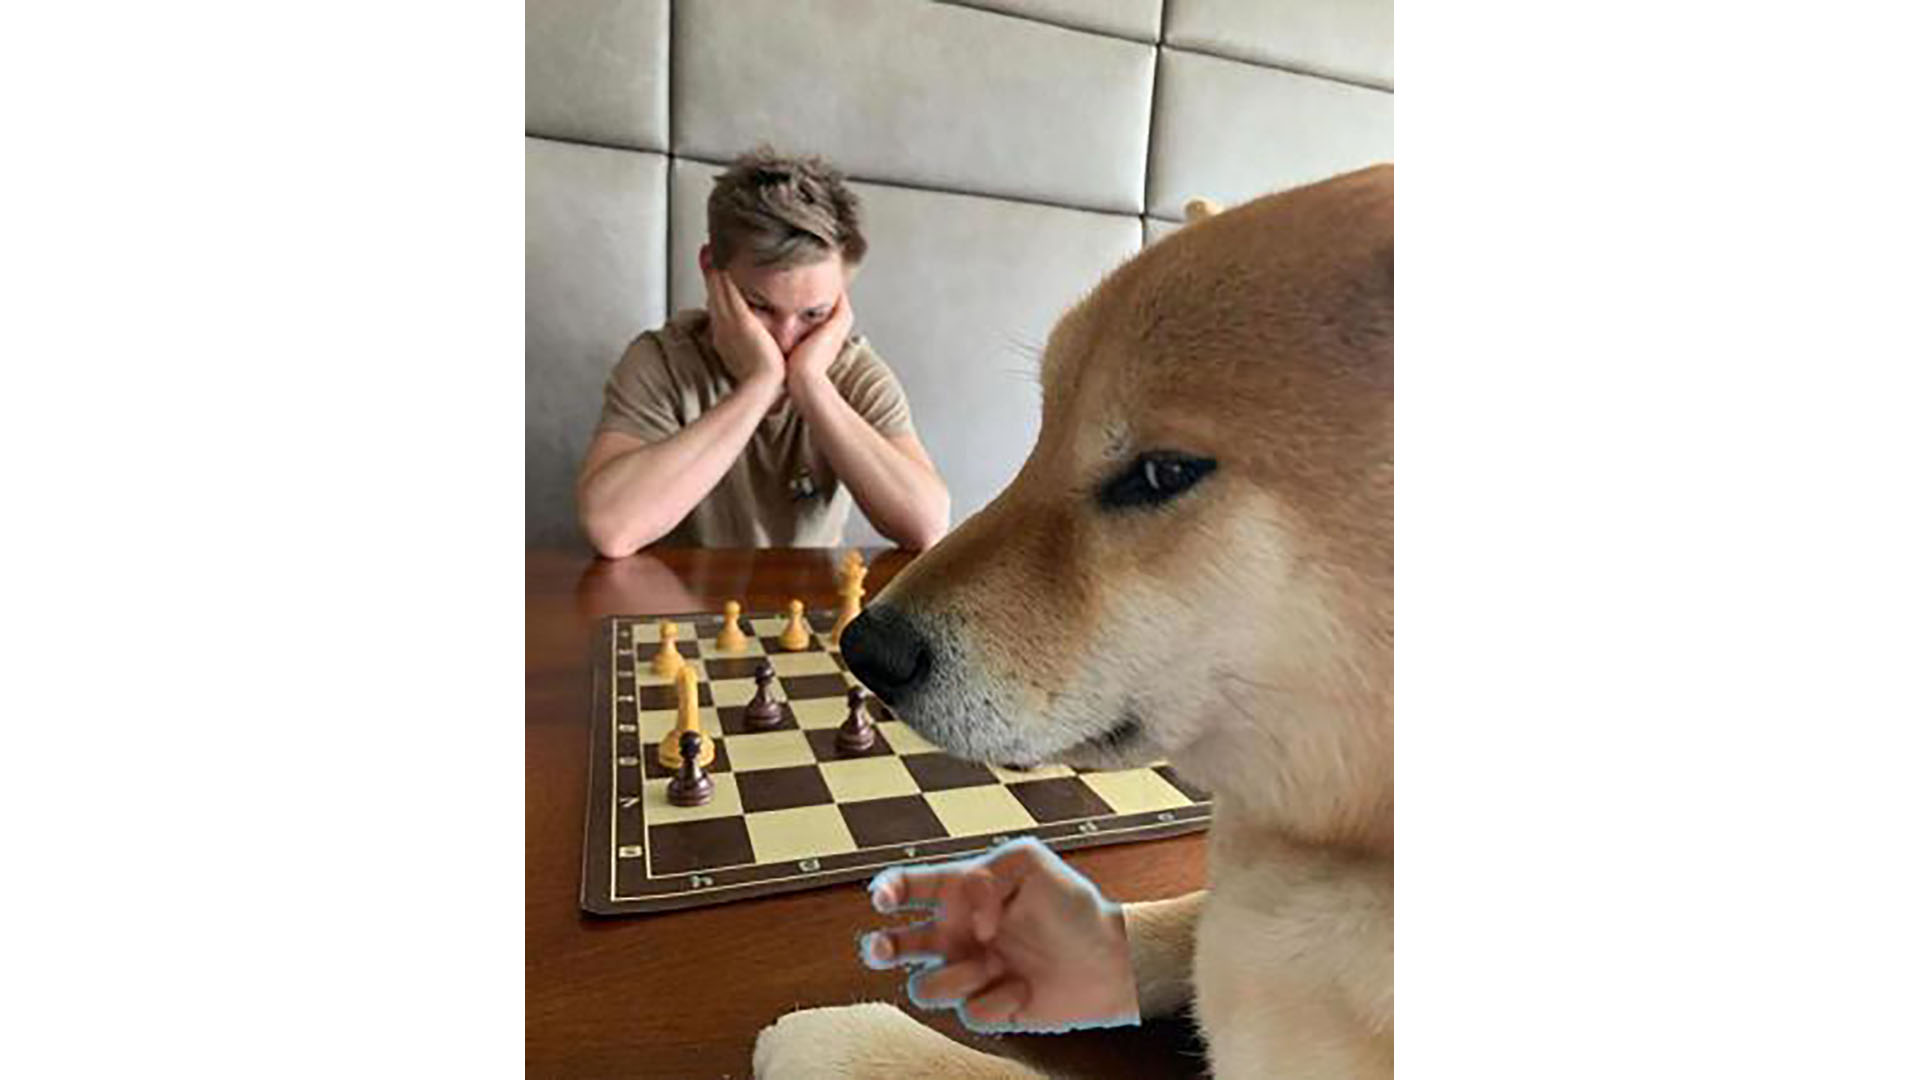 A boy plays chess with a dog making one of the proposed UHCL hand signs.